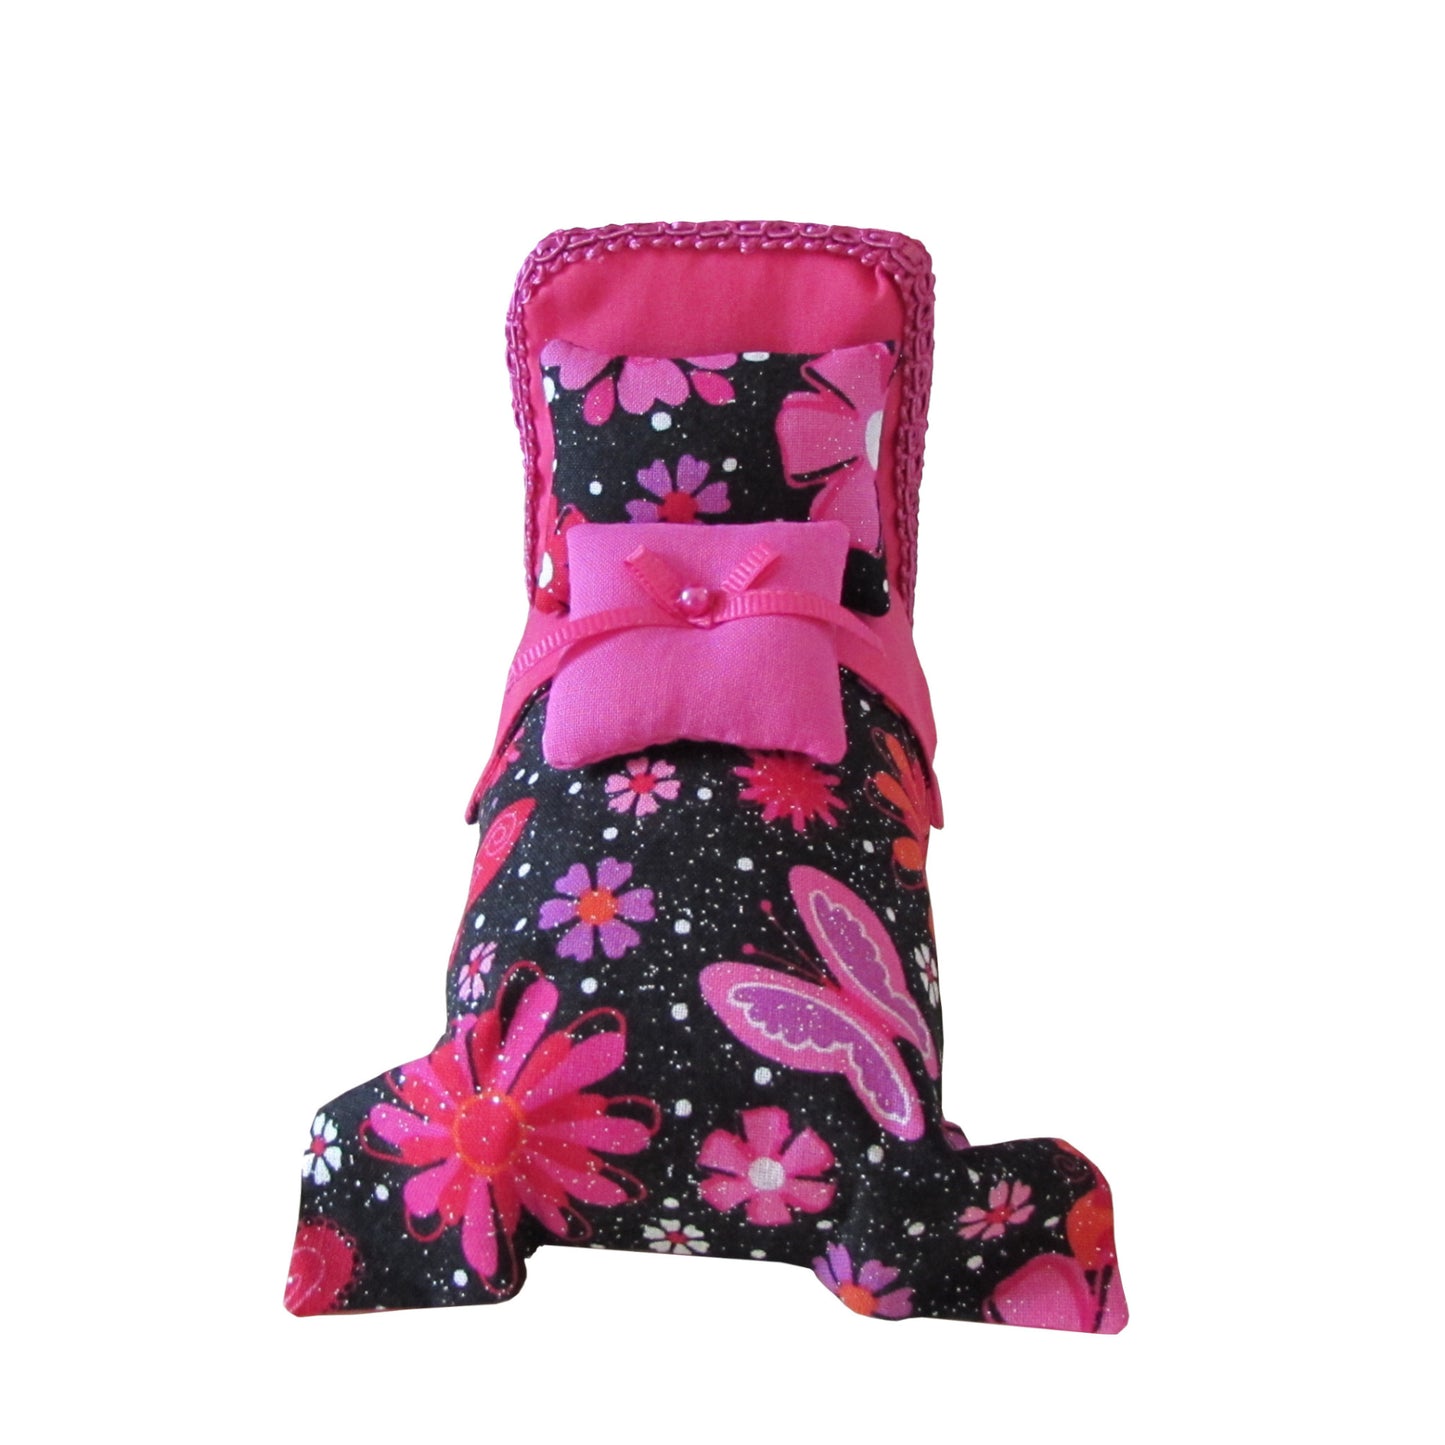 Pink Pincushion Bed with Metallic Butterfly Print Bedding Front view